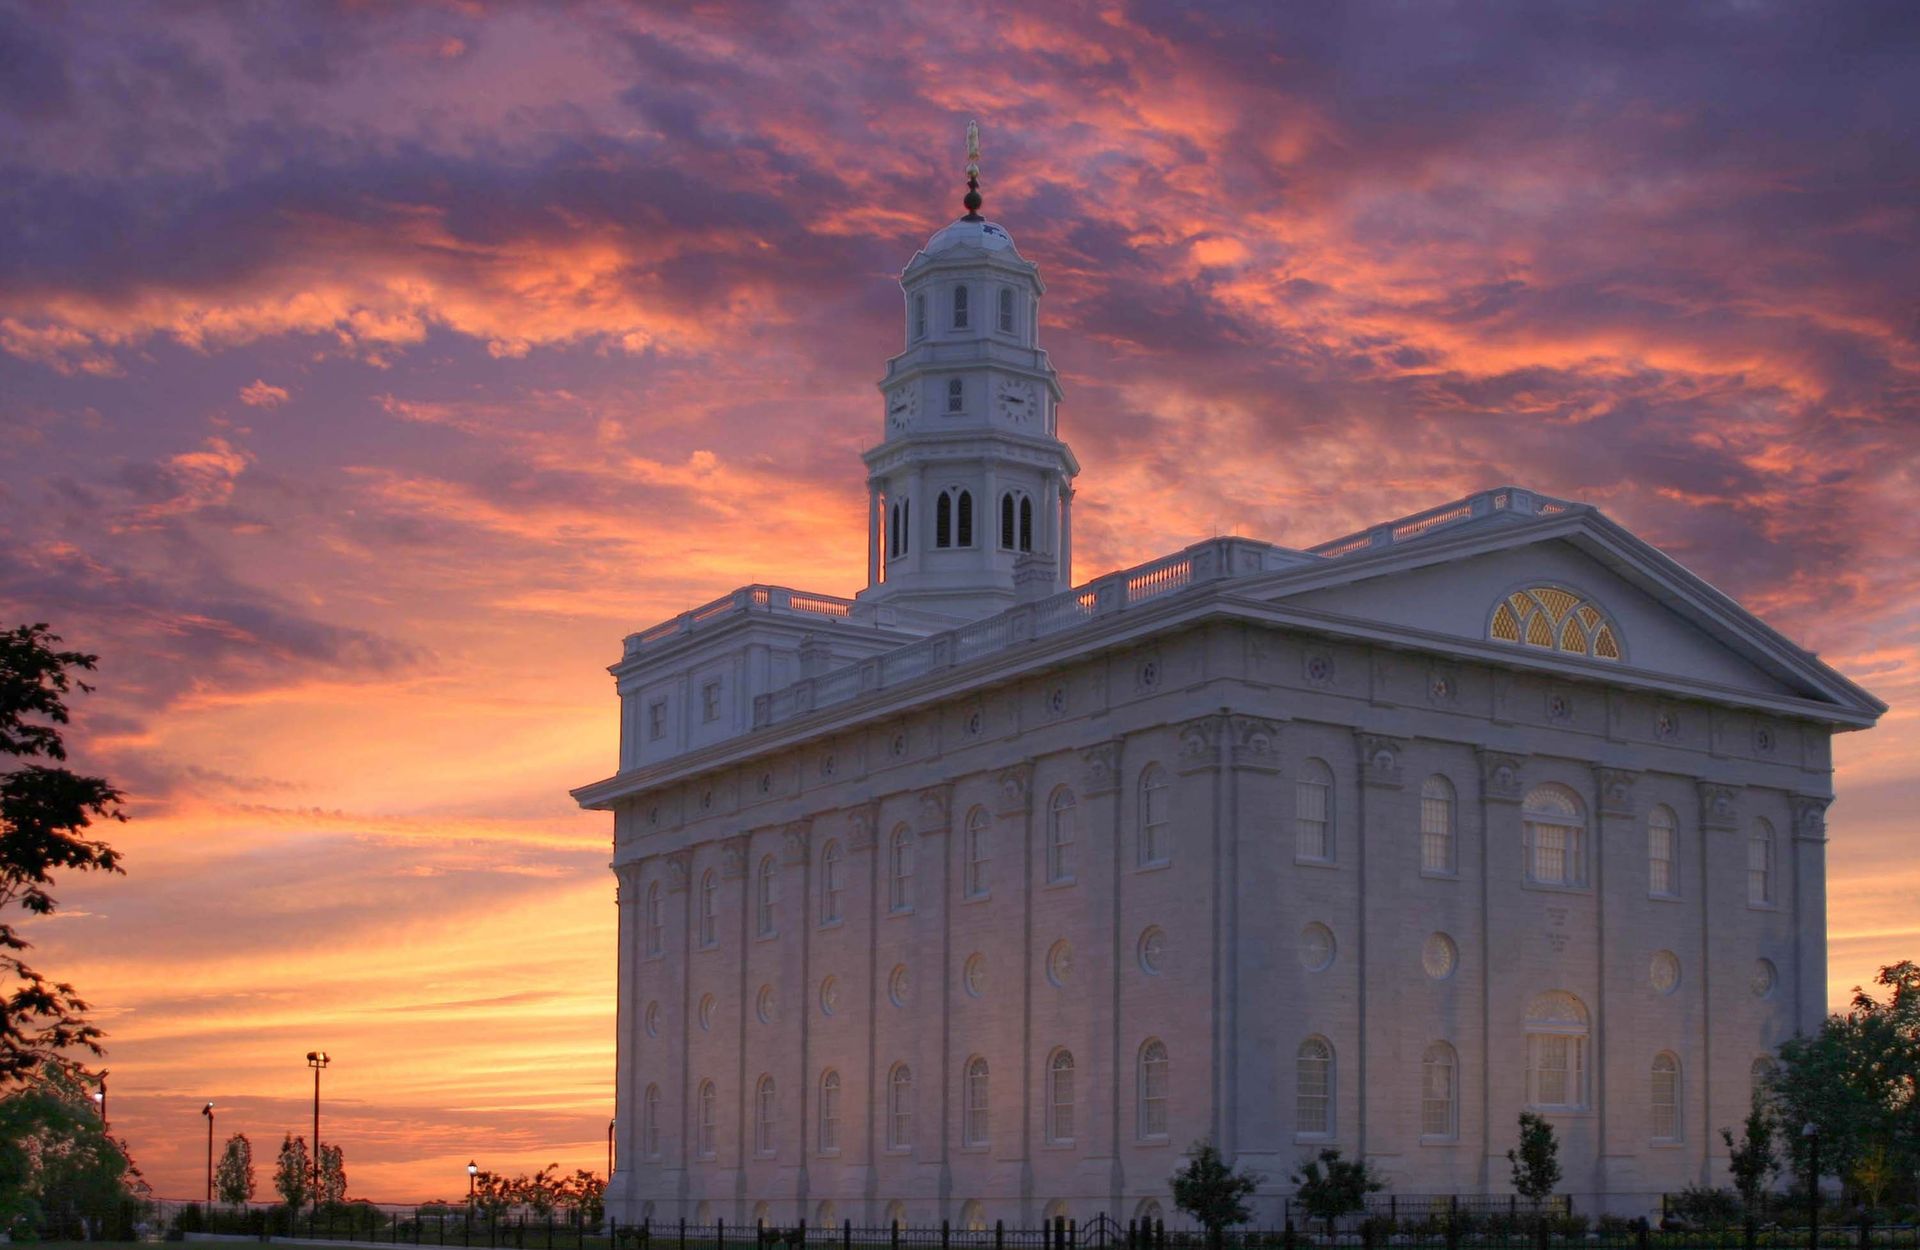 The Nauvoo Illinois Temple back view at sunset, including scenery.